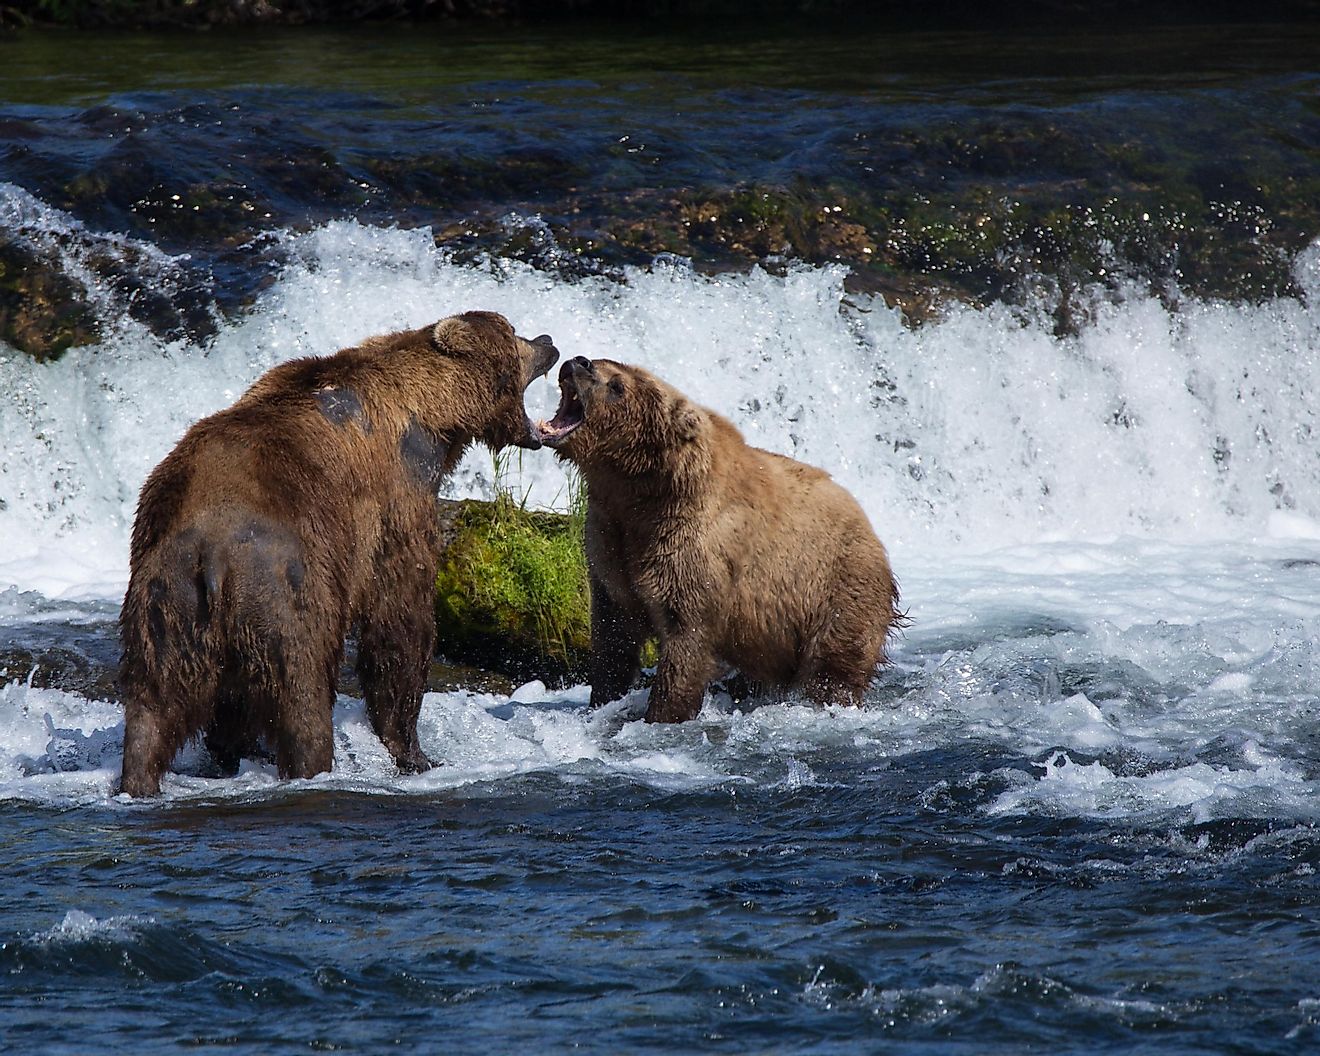 Two brown bears staring each other down in a show of dominance. A fight is likely to result from such a confrontation.